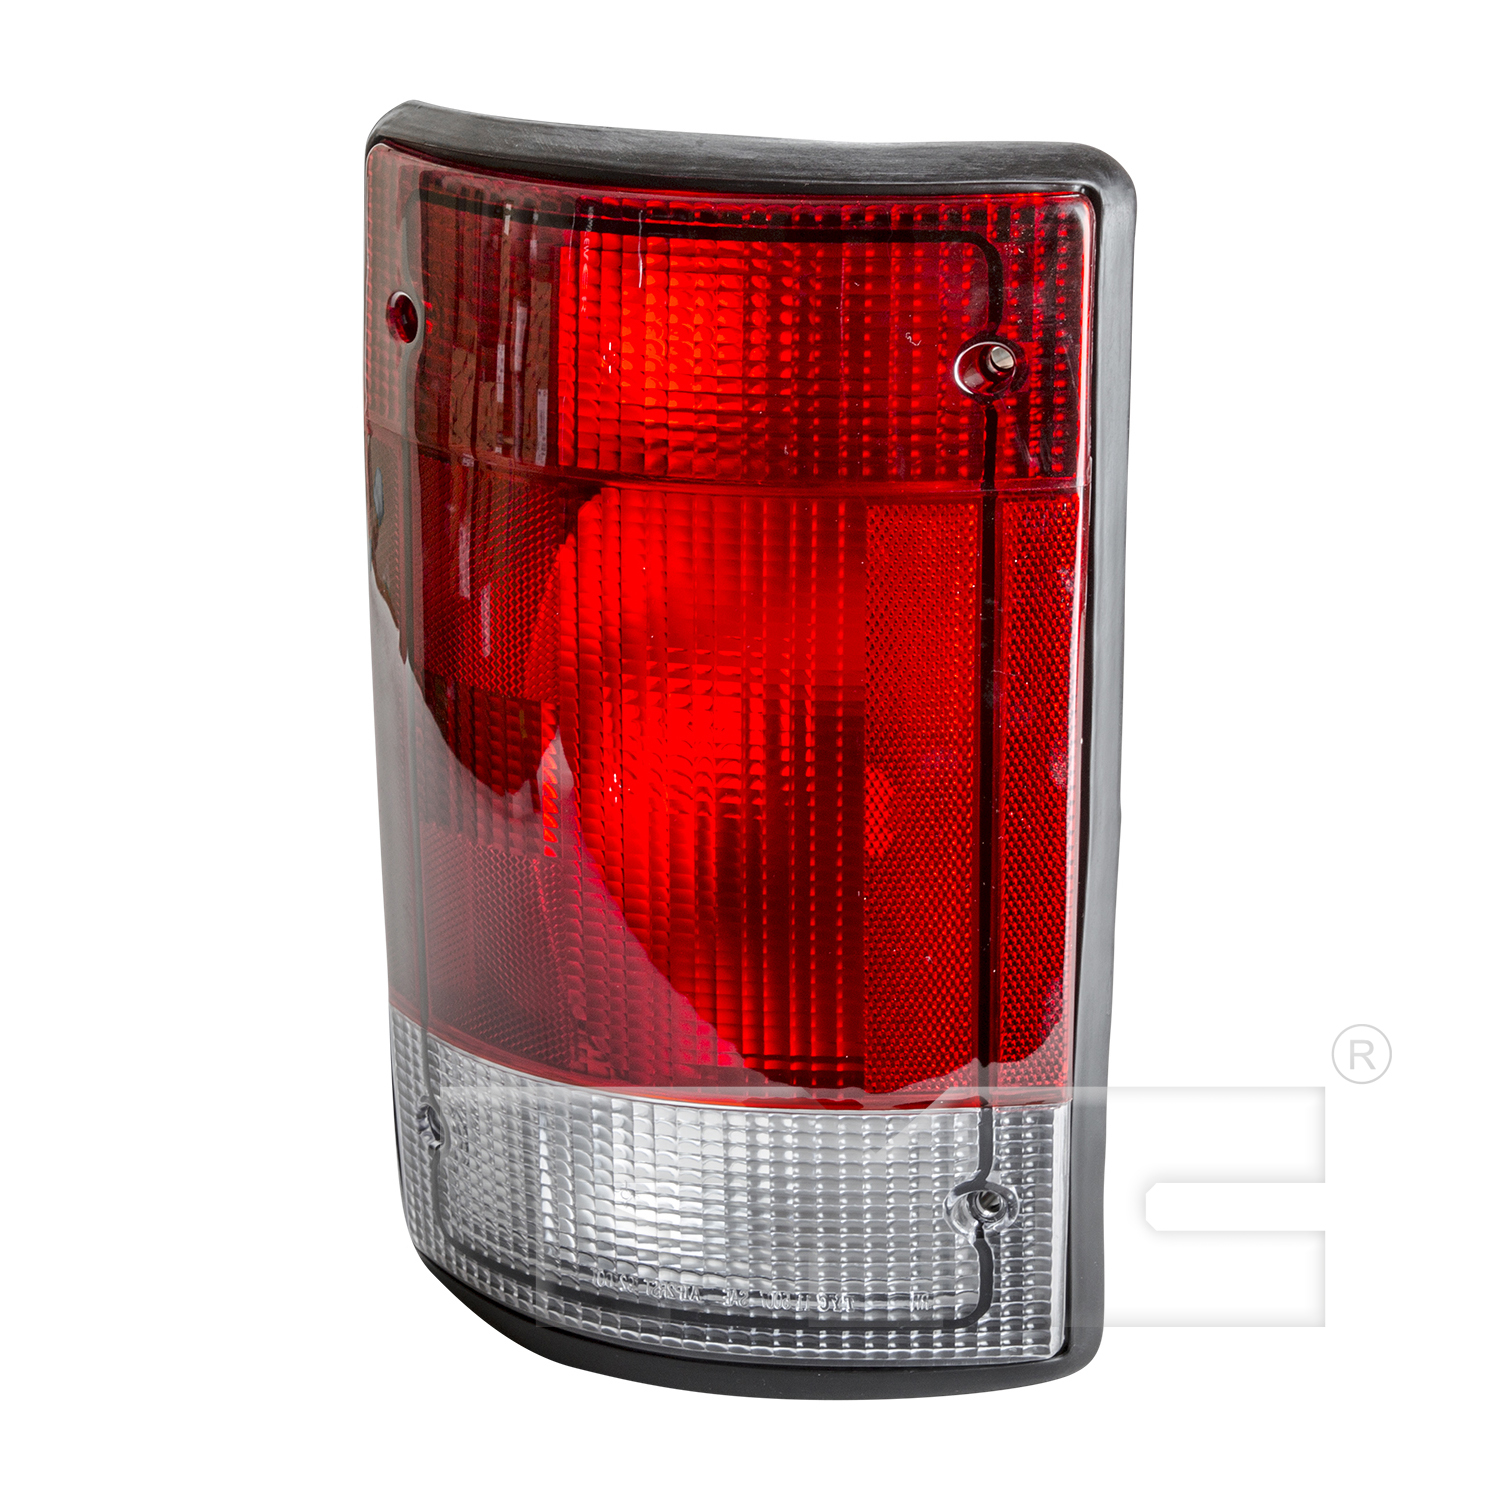 Aftermarket TAILLIGHTS for FORD - E-150 ECONOLINE CLUB WAGON, E-150 ECONOLINE CLUB WAGON,95-02,LT Taillamp assy